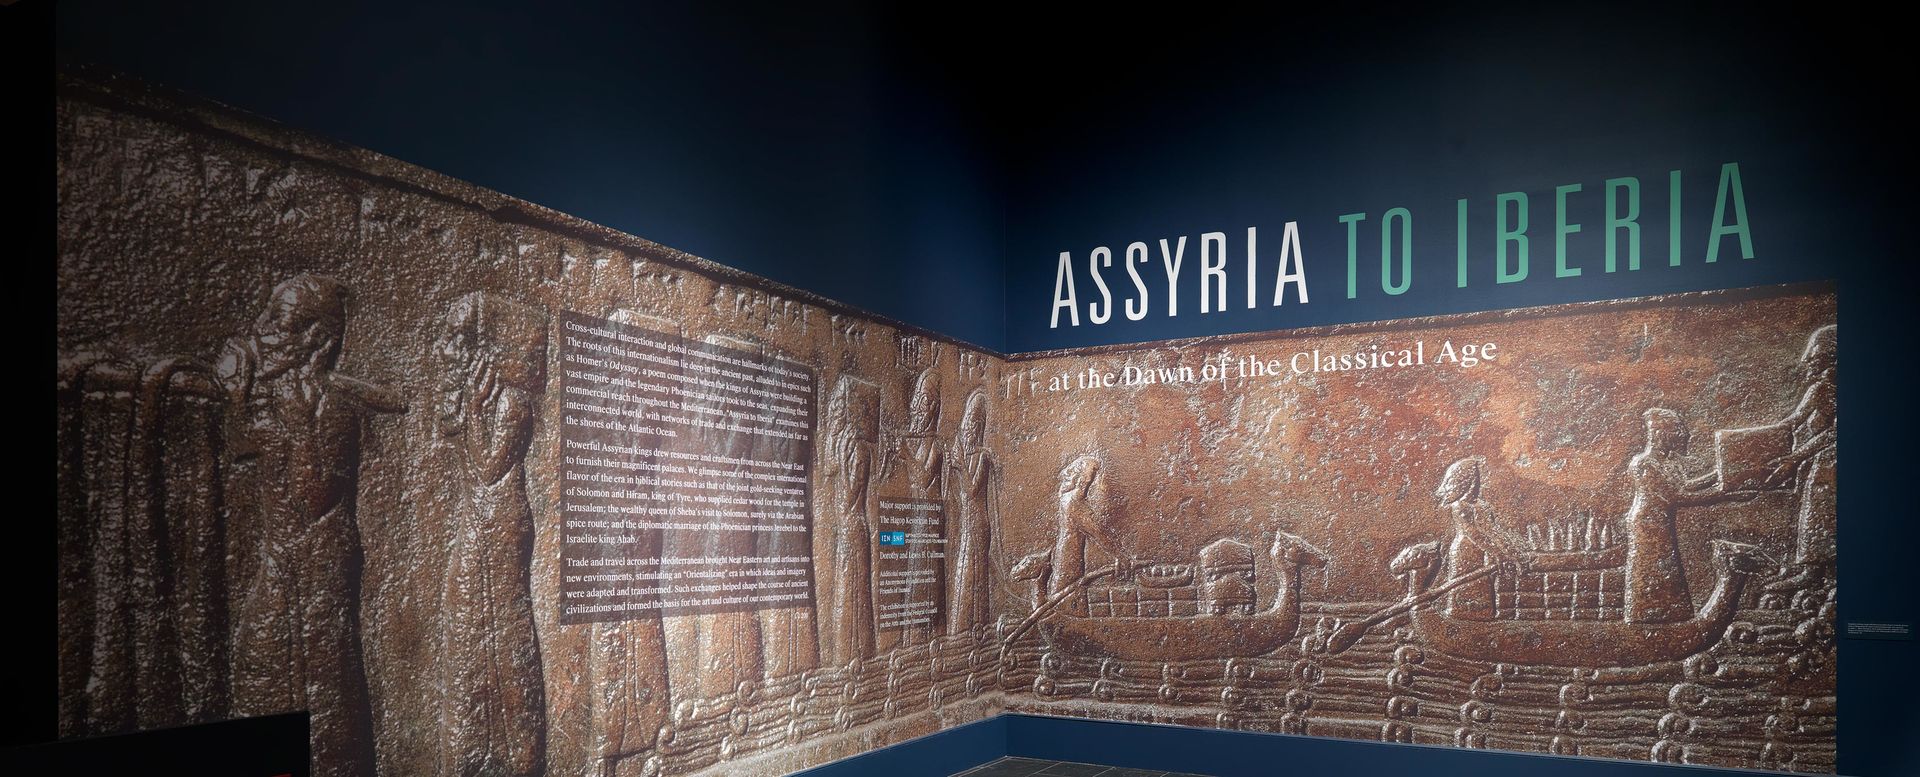 View of the entrance to the exhibition "Assyria to Iberia at the Dawn of the Classical Age"